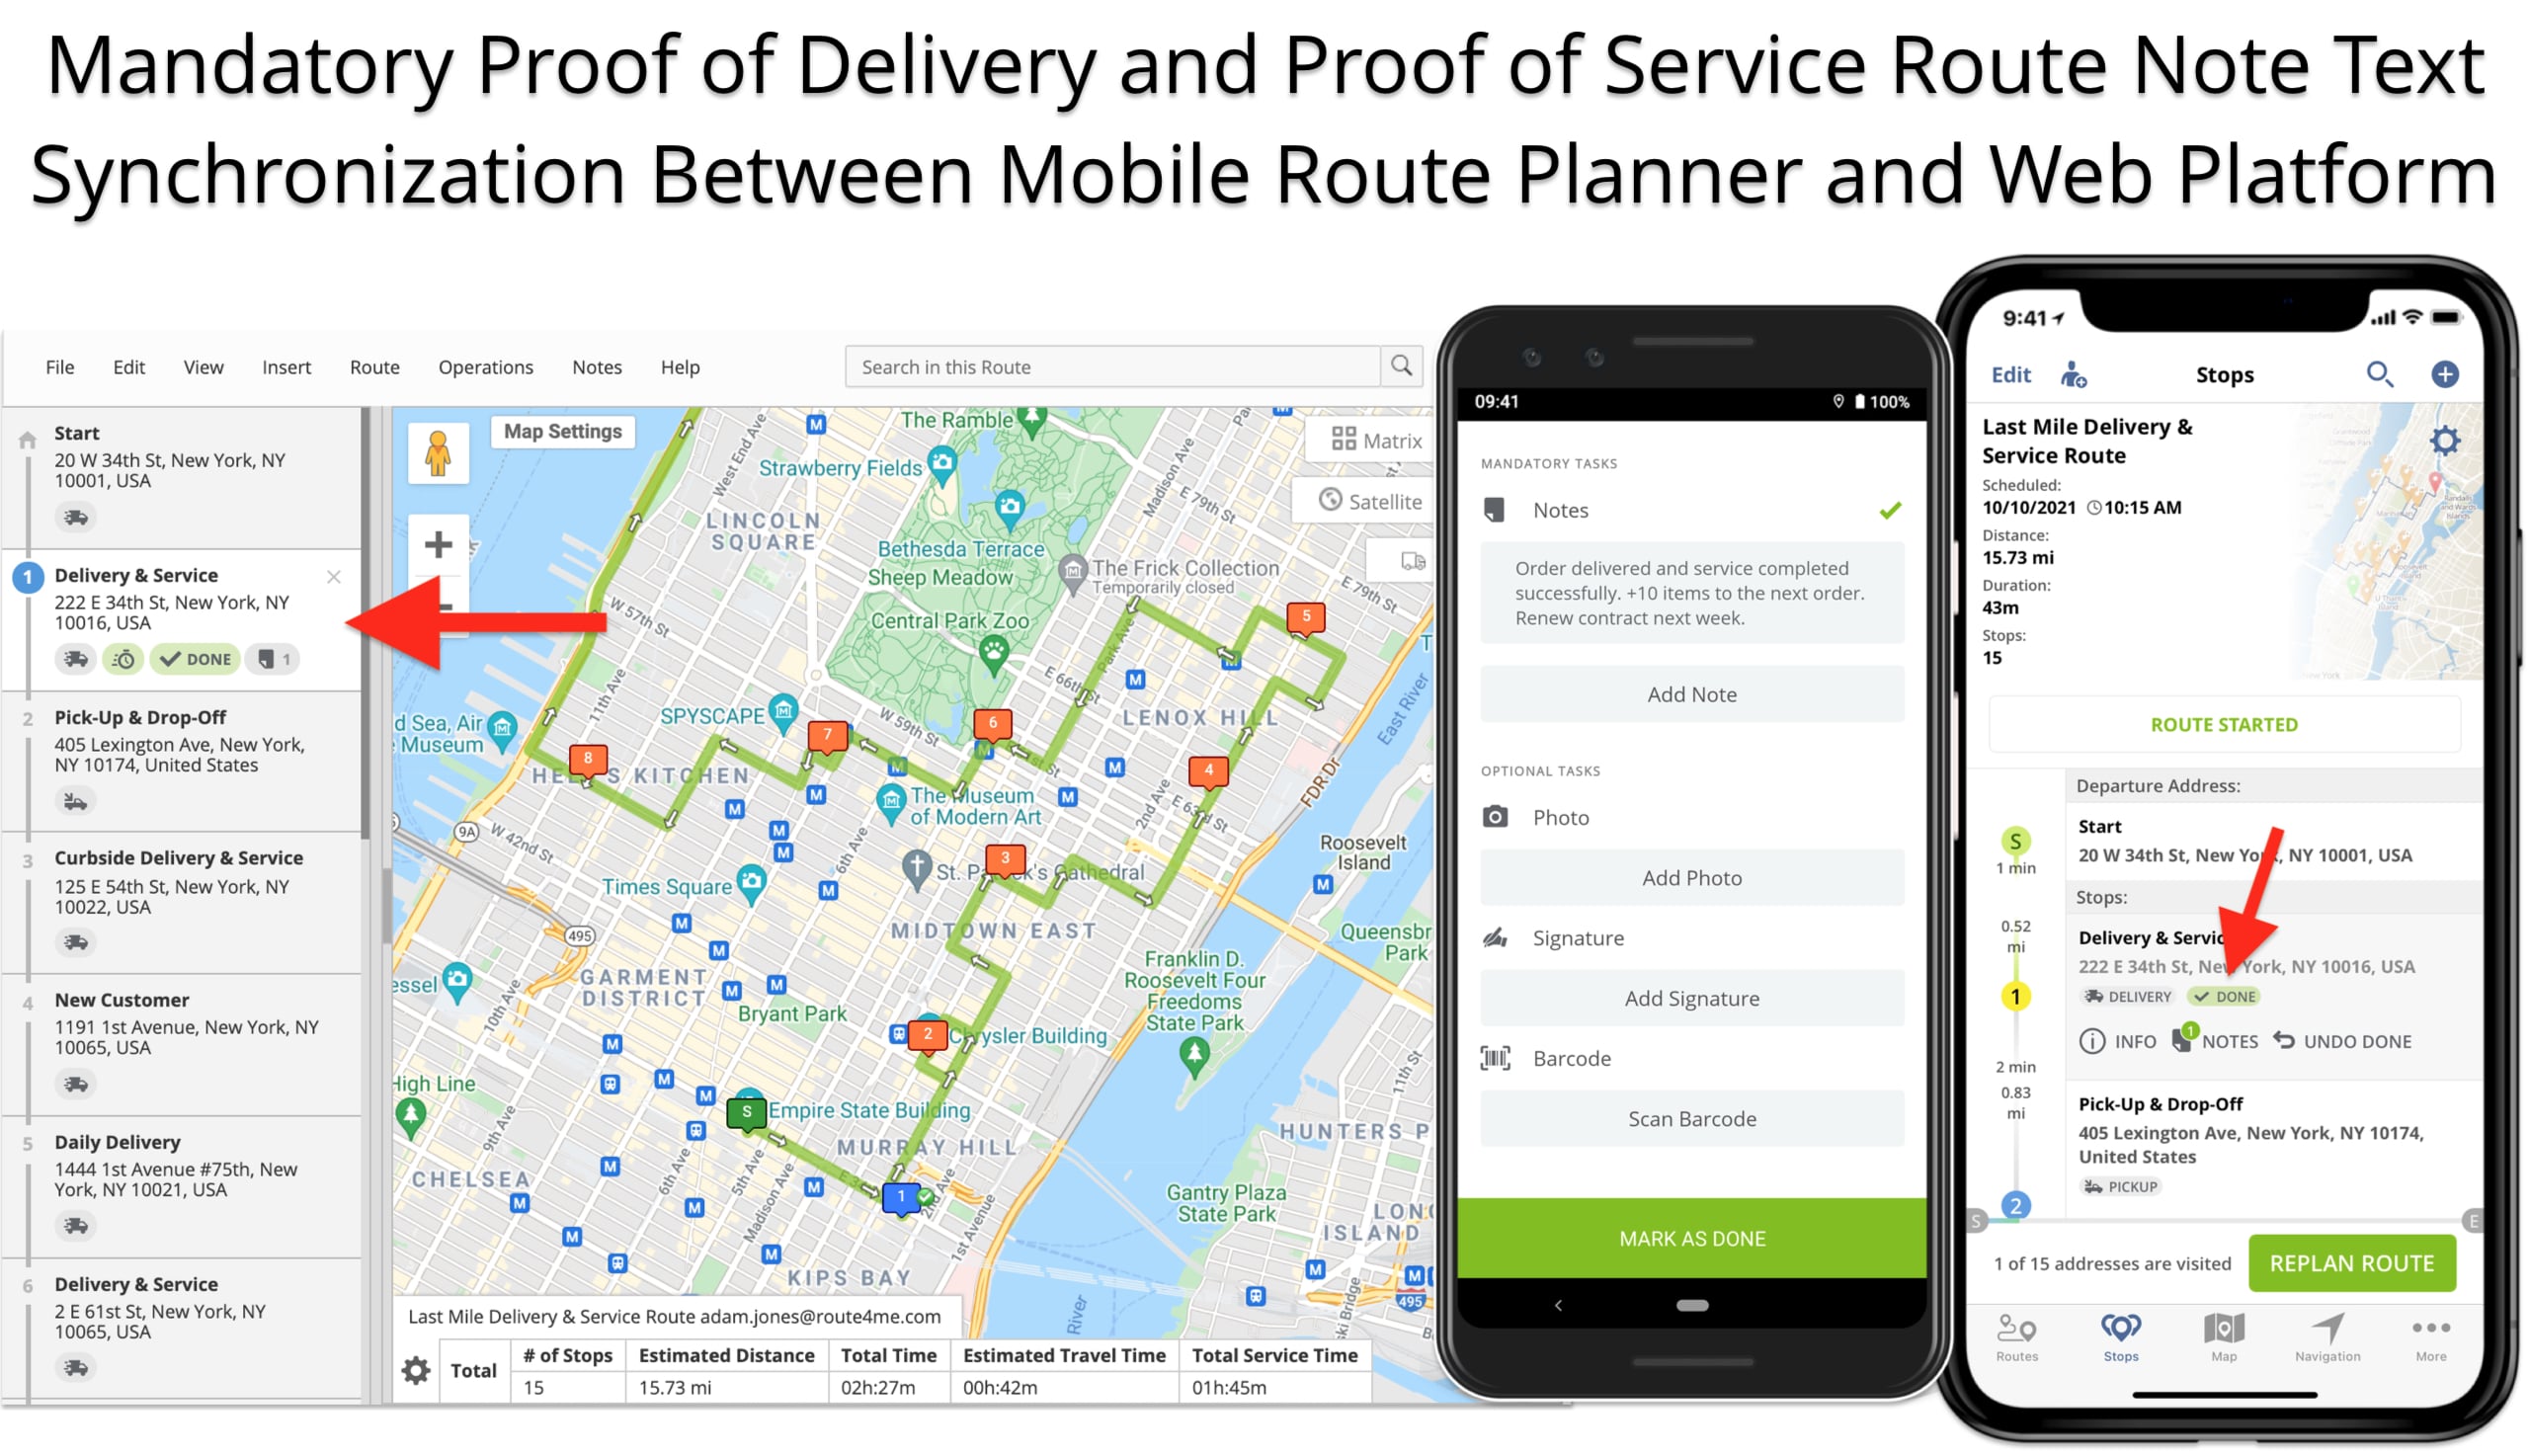 Route note text attachment synchronization in real-time from mobile route planner app to Website.